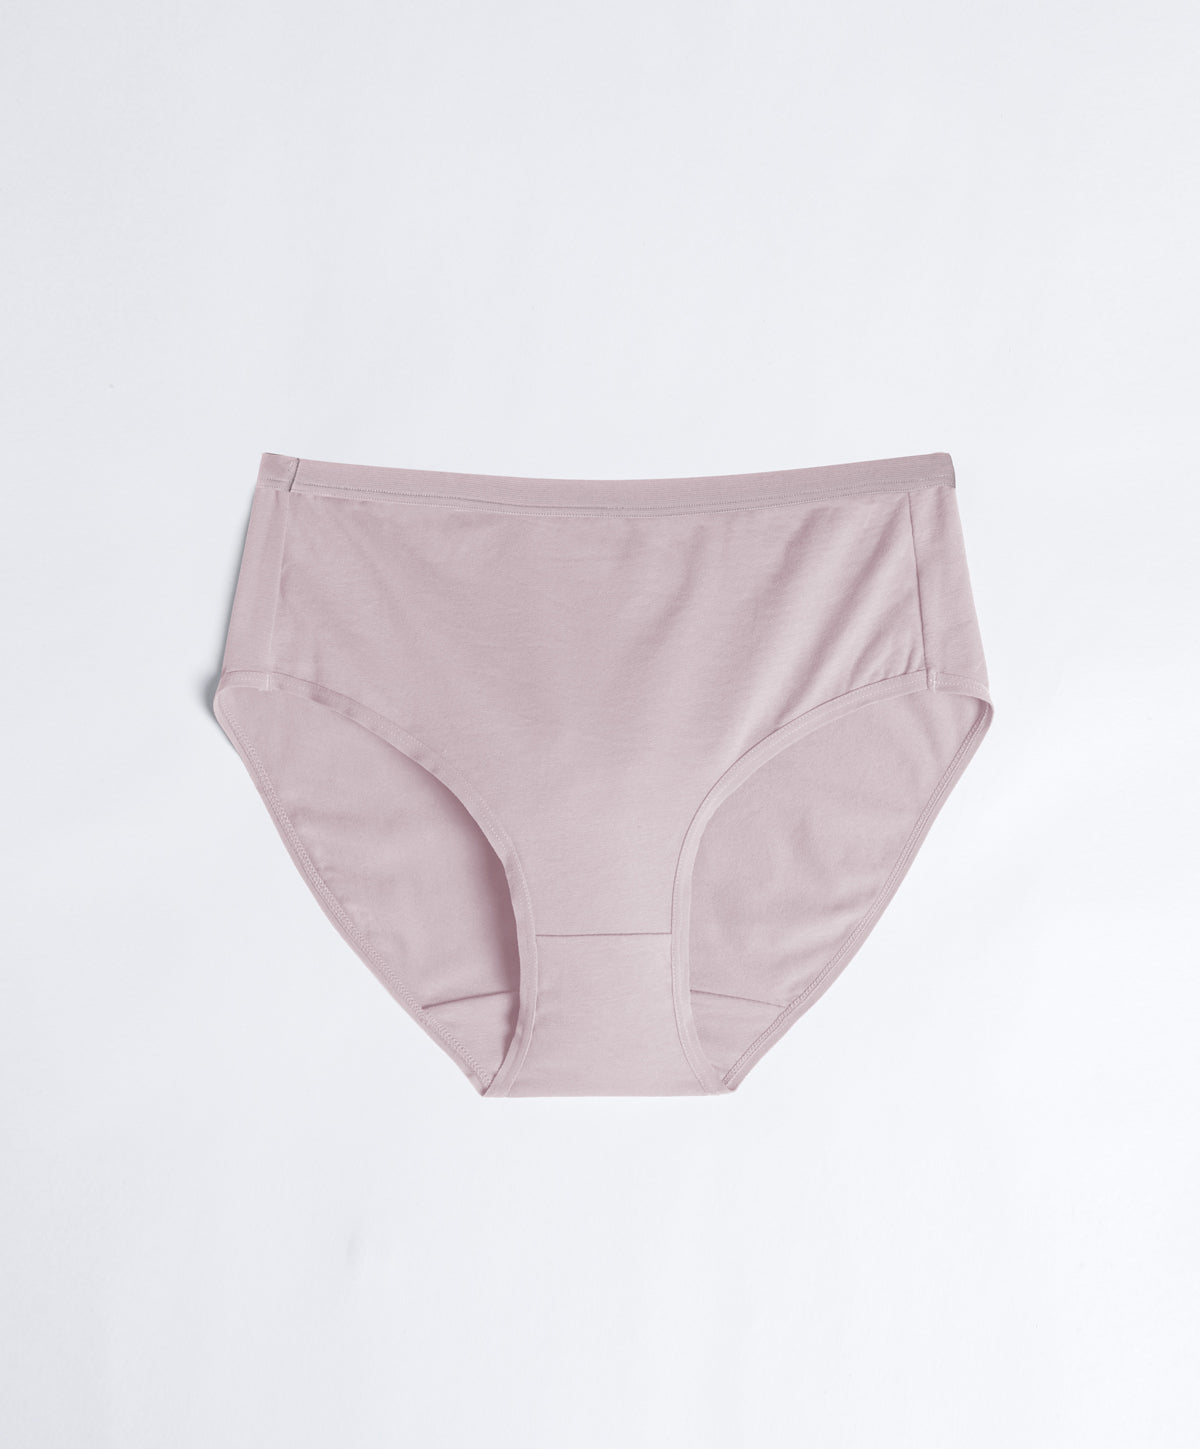 Pierre Cardin Trio of cotton briefs for girls: for sale at 6.99€ on